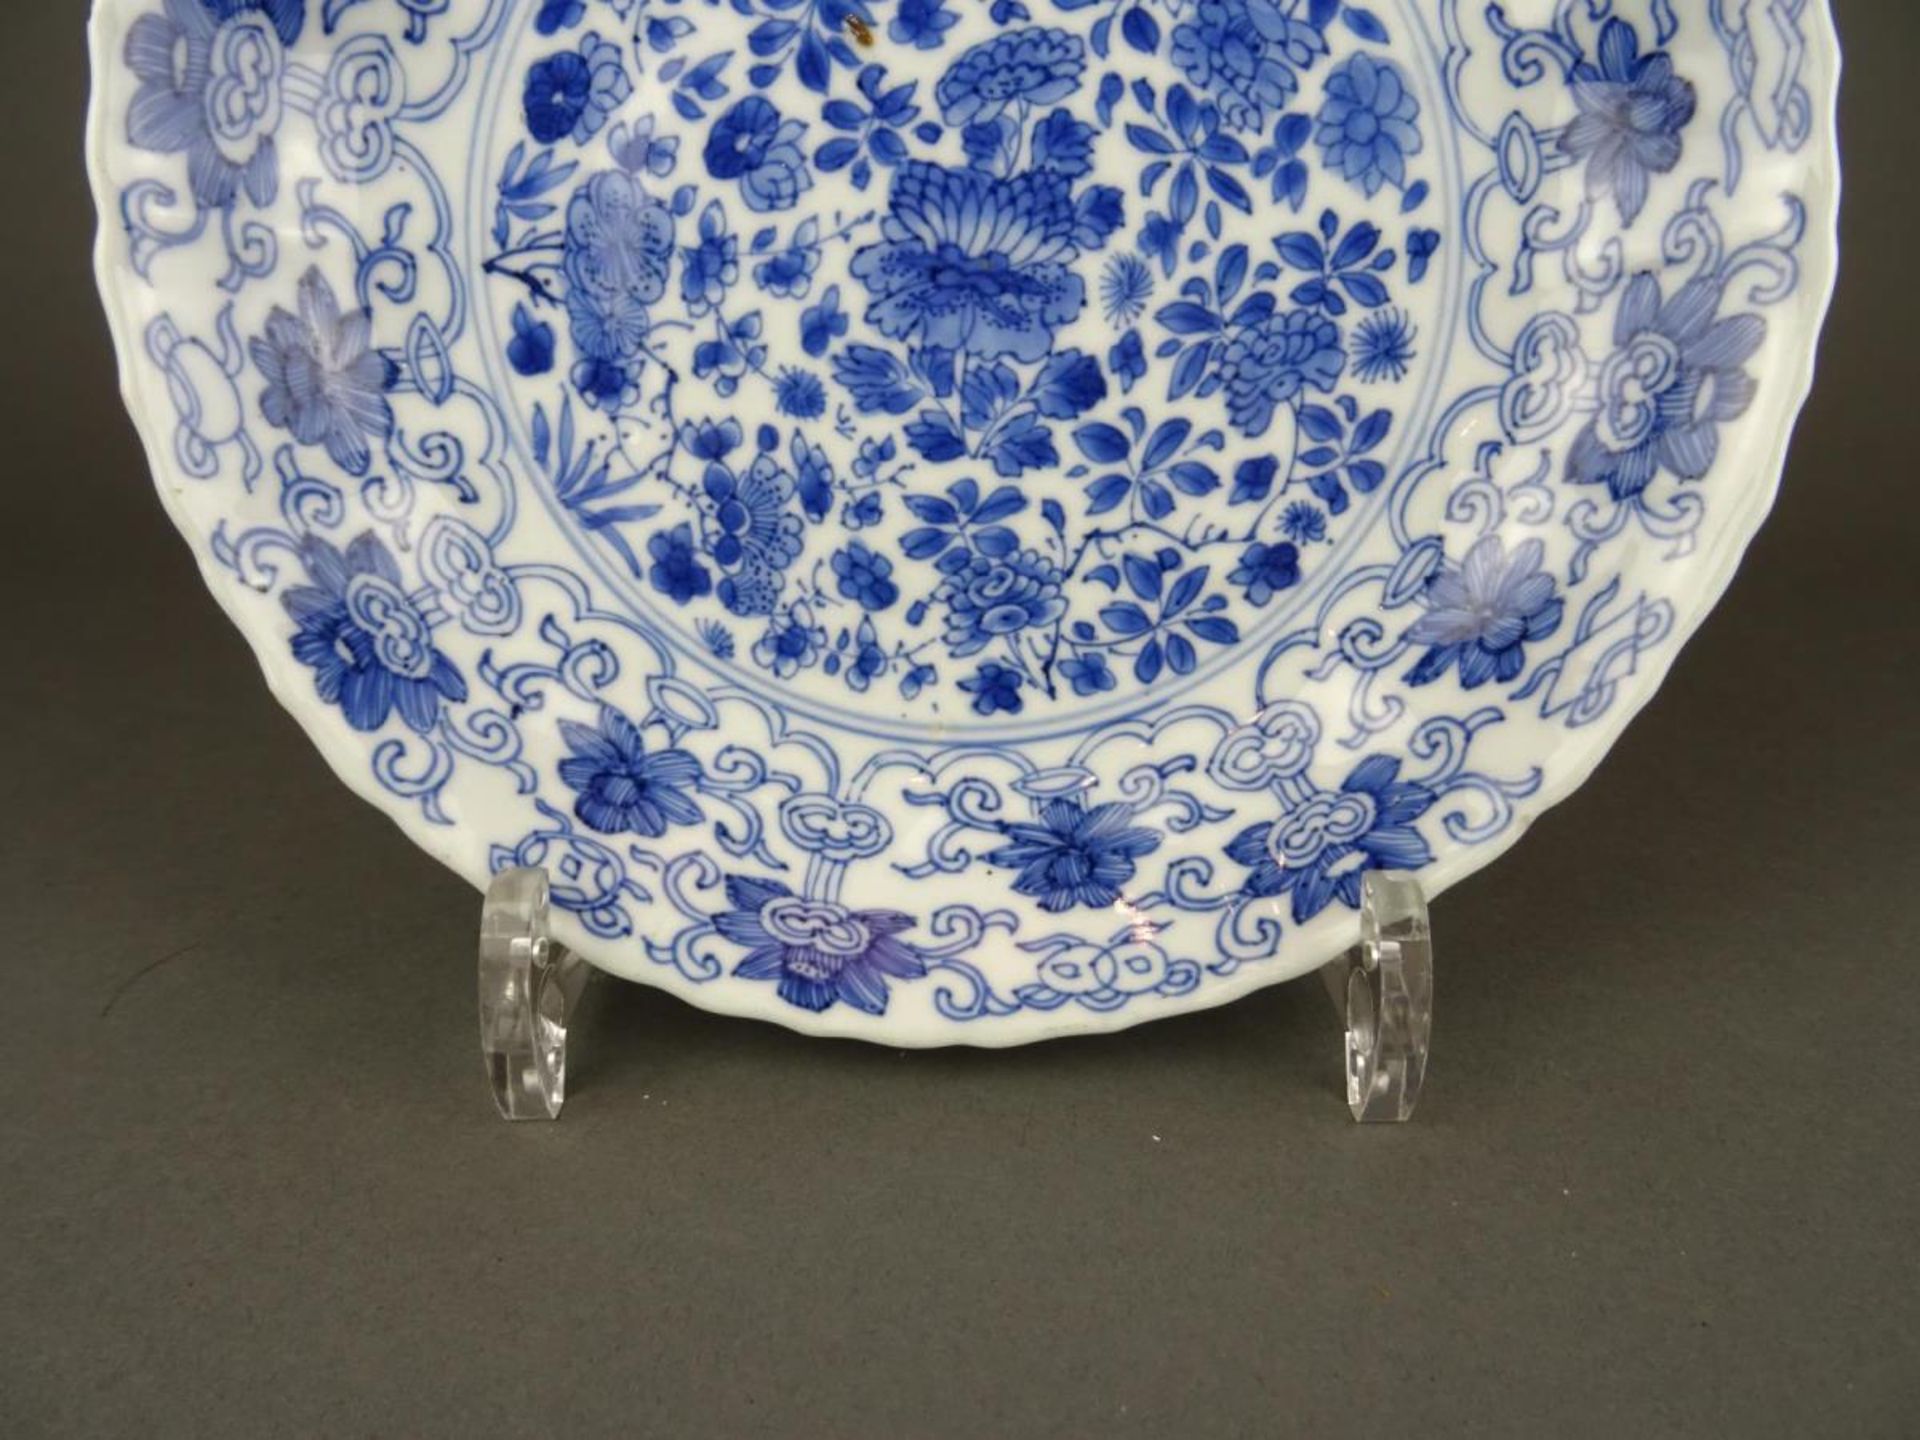 Chinese porcelain B/W plate with flowers - Chenghua mark - Image 3 of 5